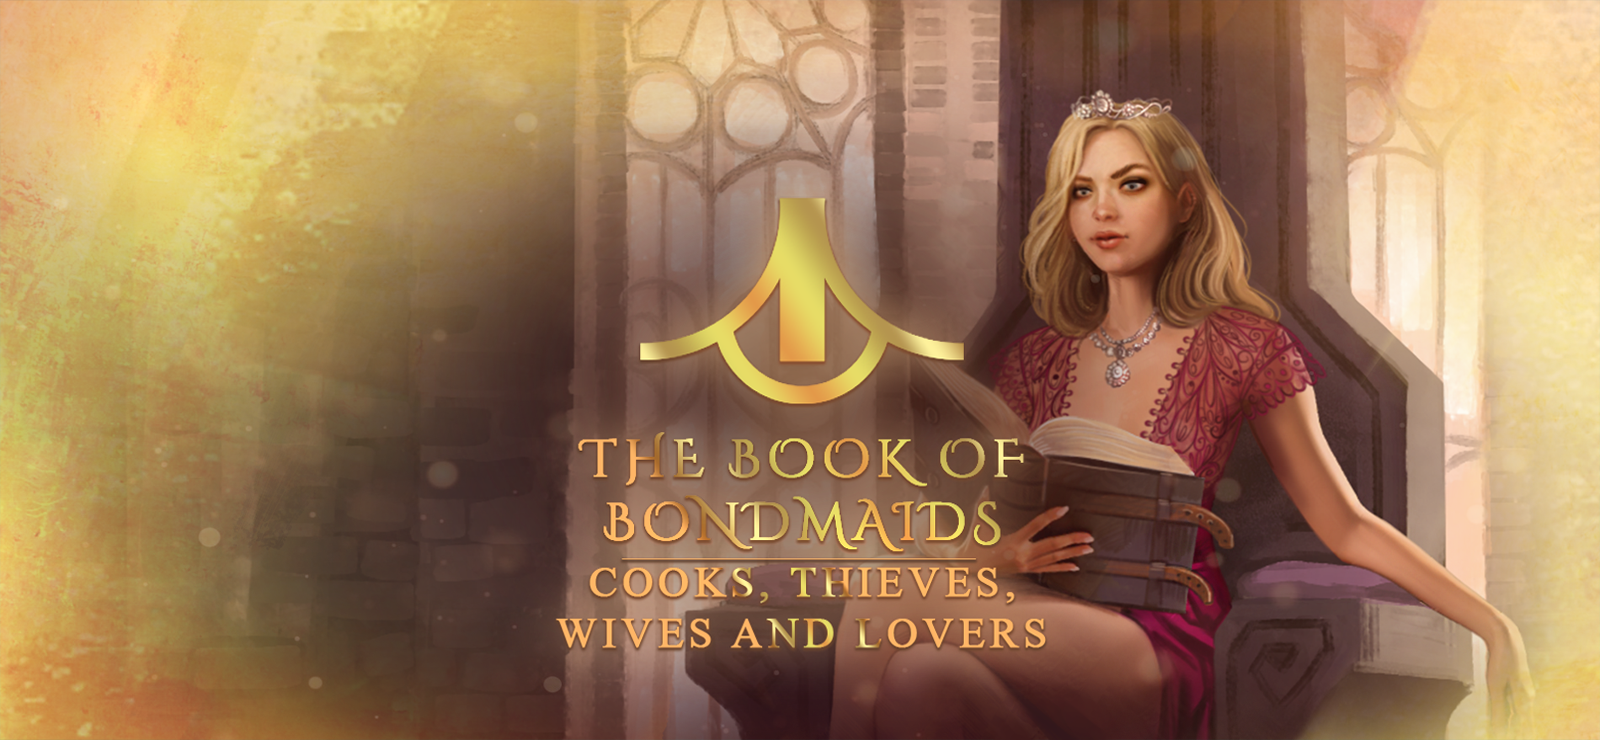 The Book Of Bondmaids - Cooks, Thieves, Wives And Lovers